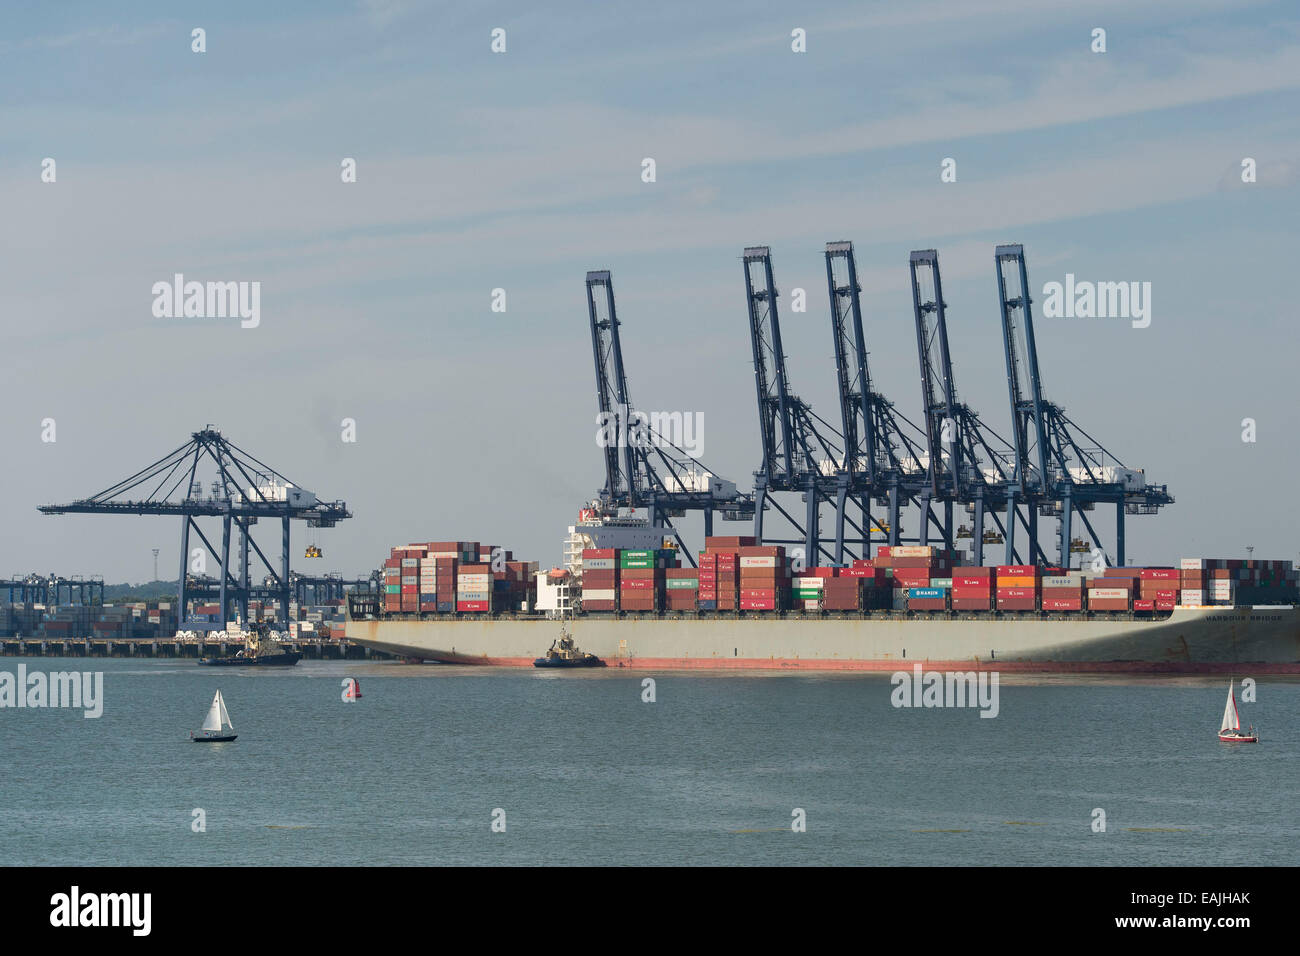 Shipping containers at the Port of Felixstowe in England, UK. Stock Photo